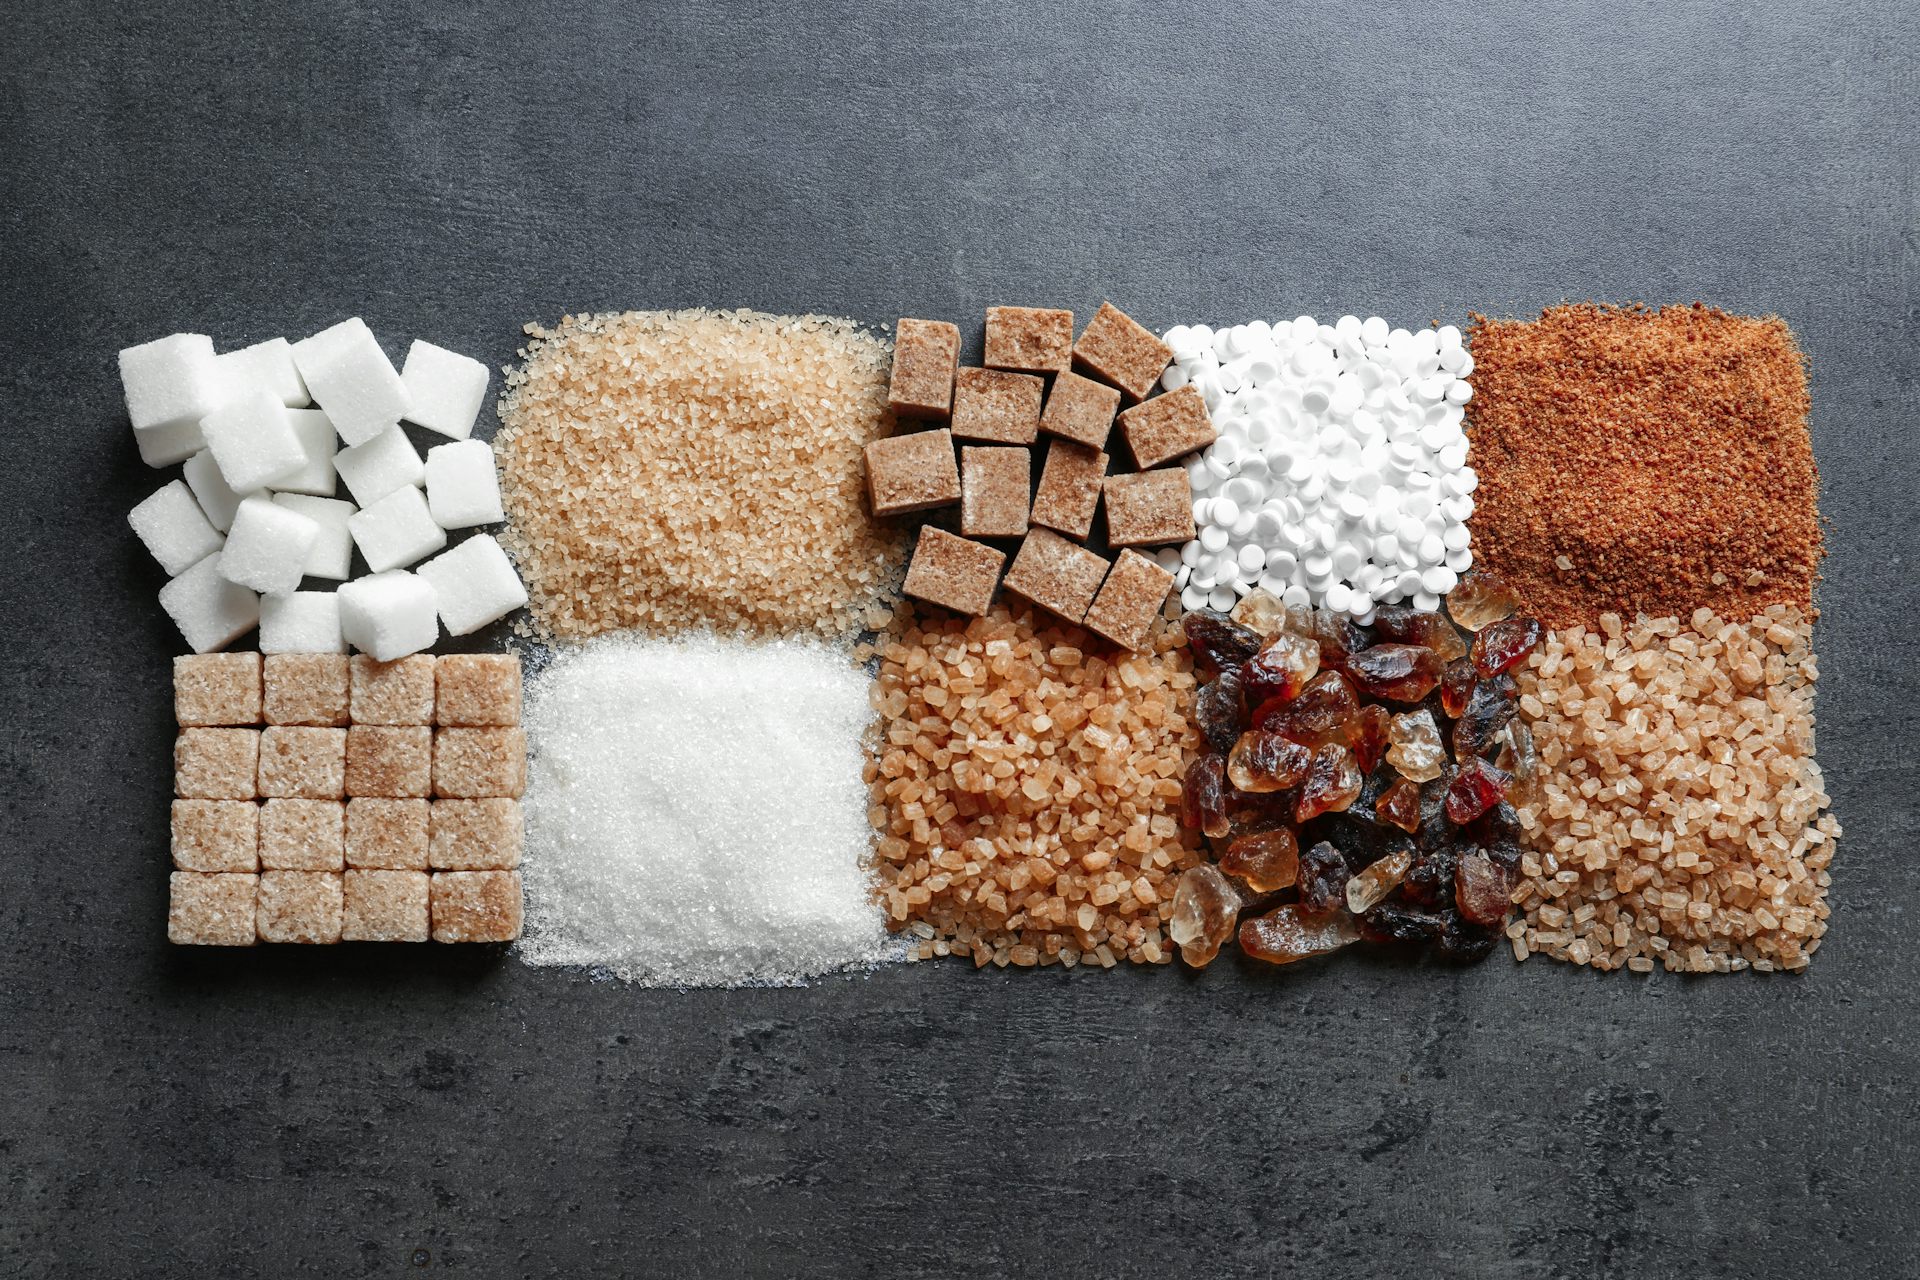 Sugar Substitutes: Is One Better or Worse for Diabetes? for Weight Loss? An Expert Explains